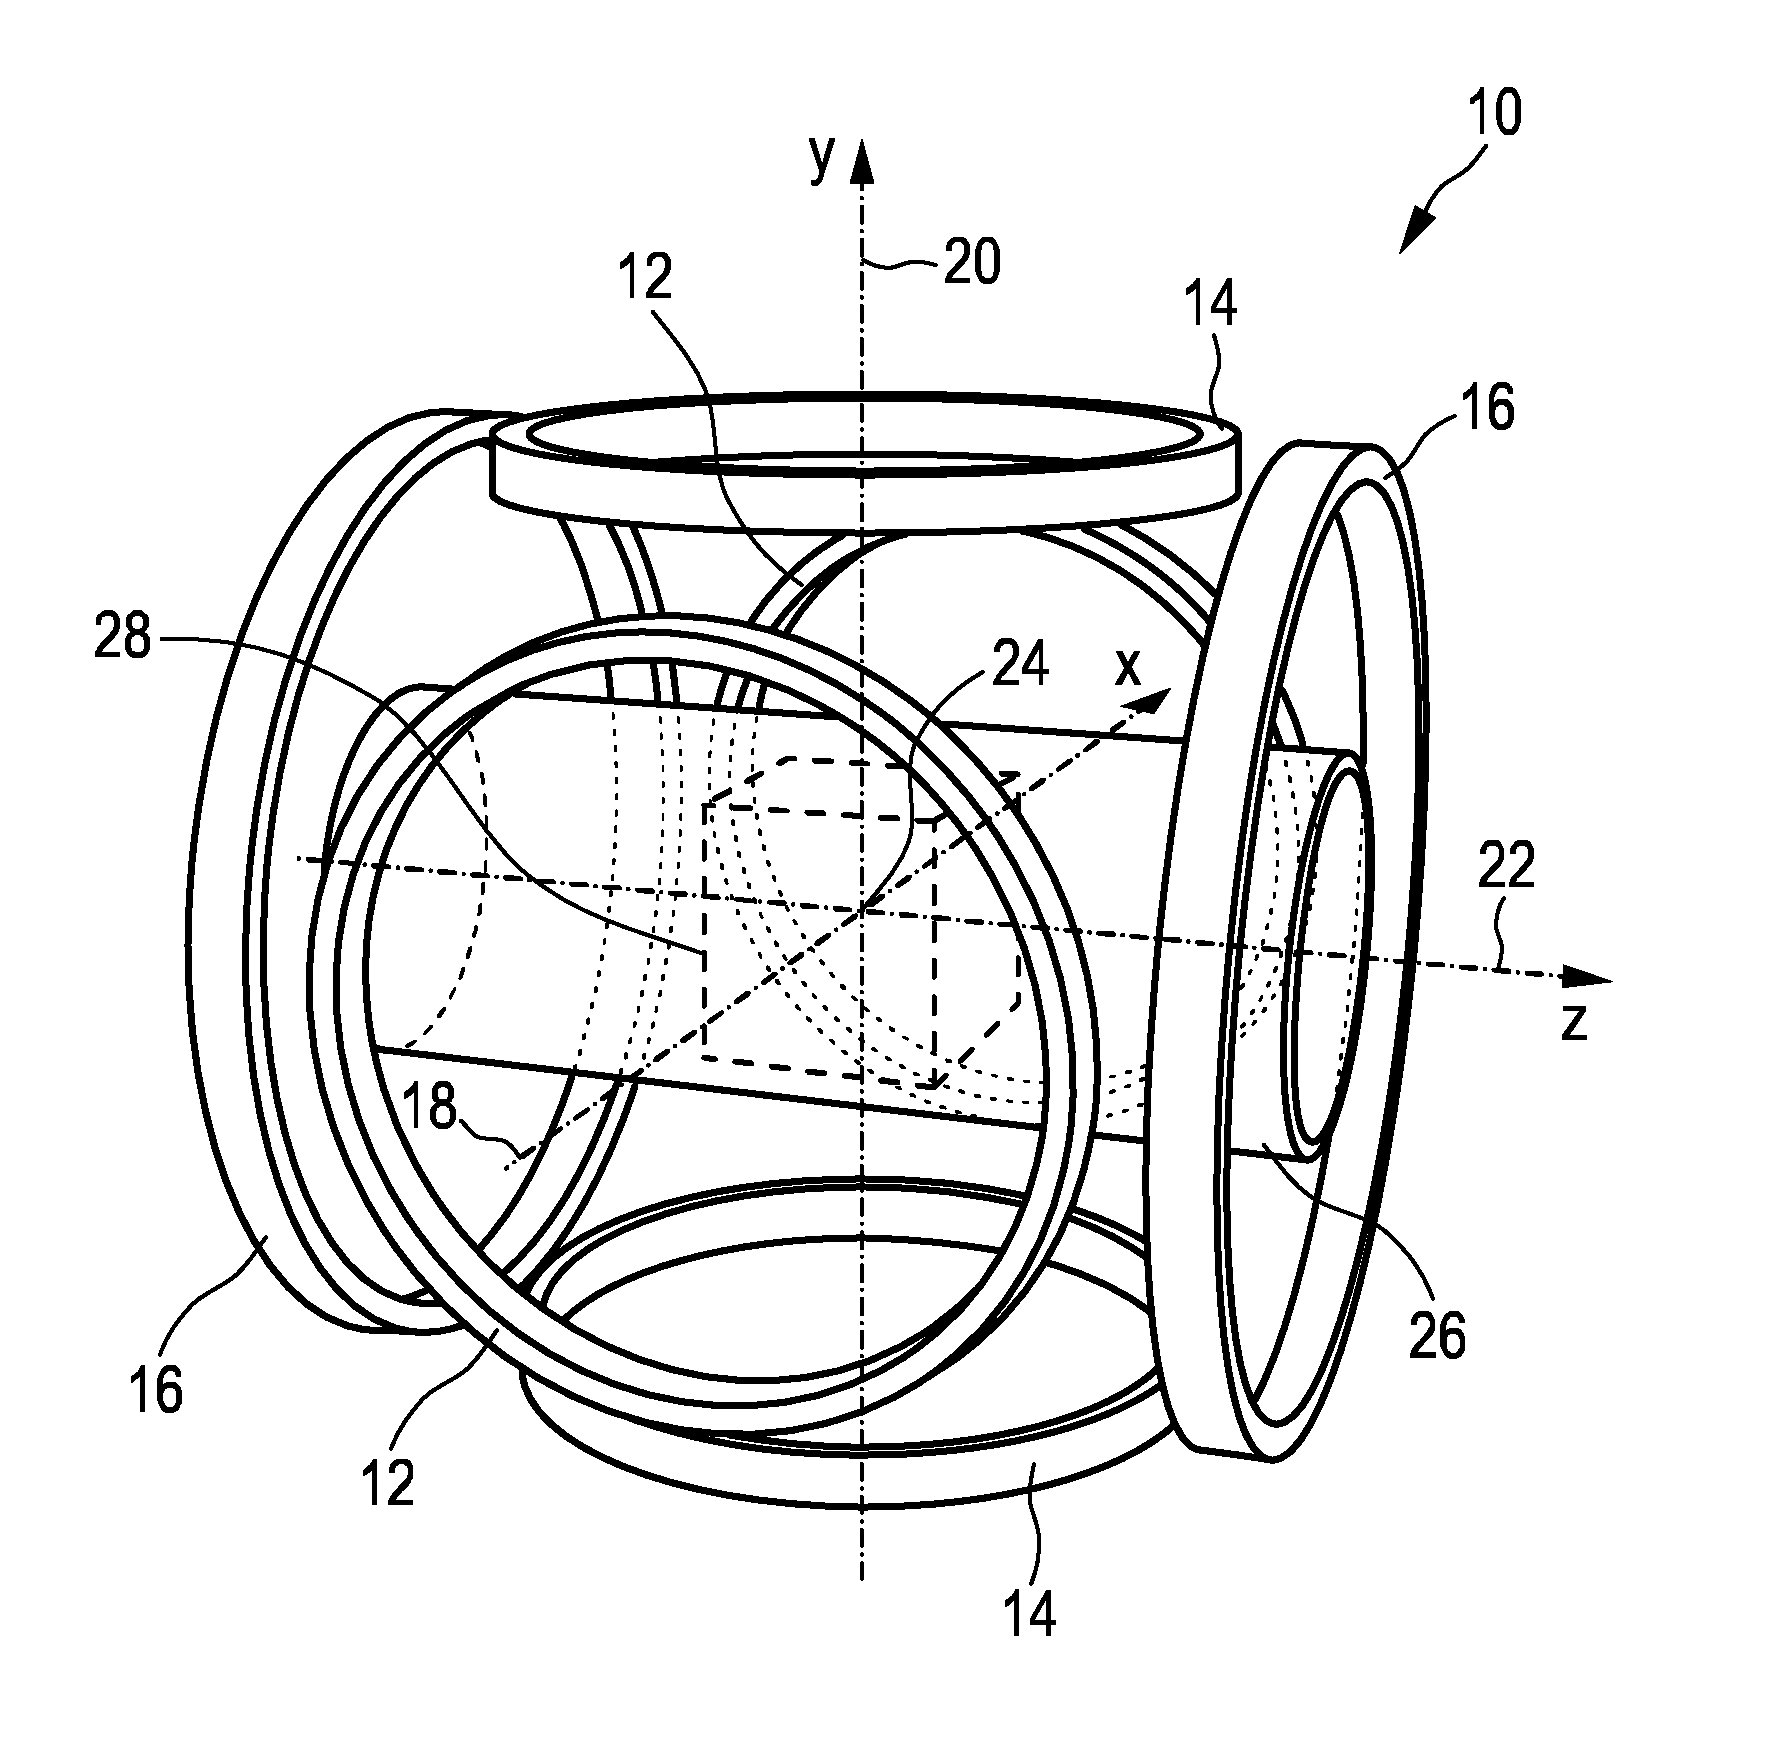 Apparatus and method for influencing and/or detecting magnetic particles having a large field of view